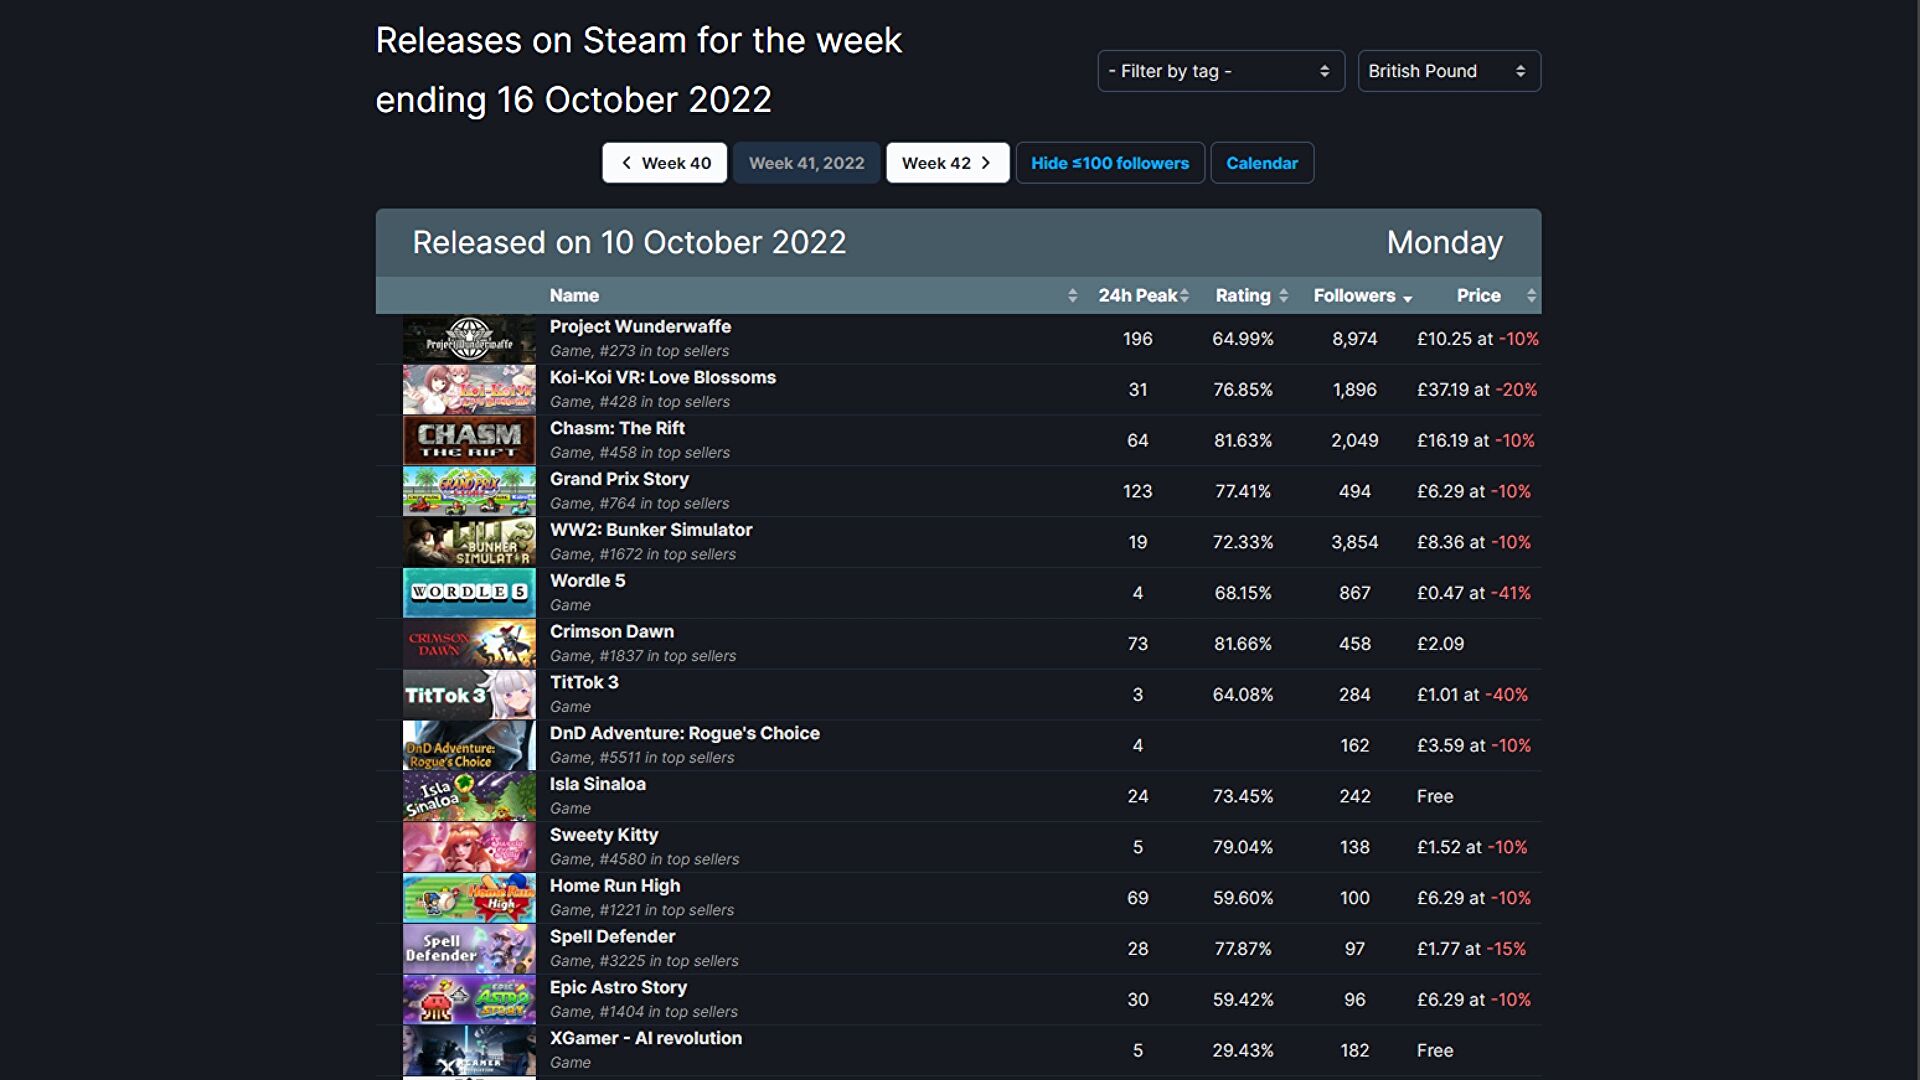 There’s now a handy way to see which games are releasing on Steam each week